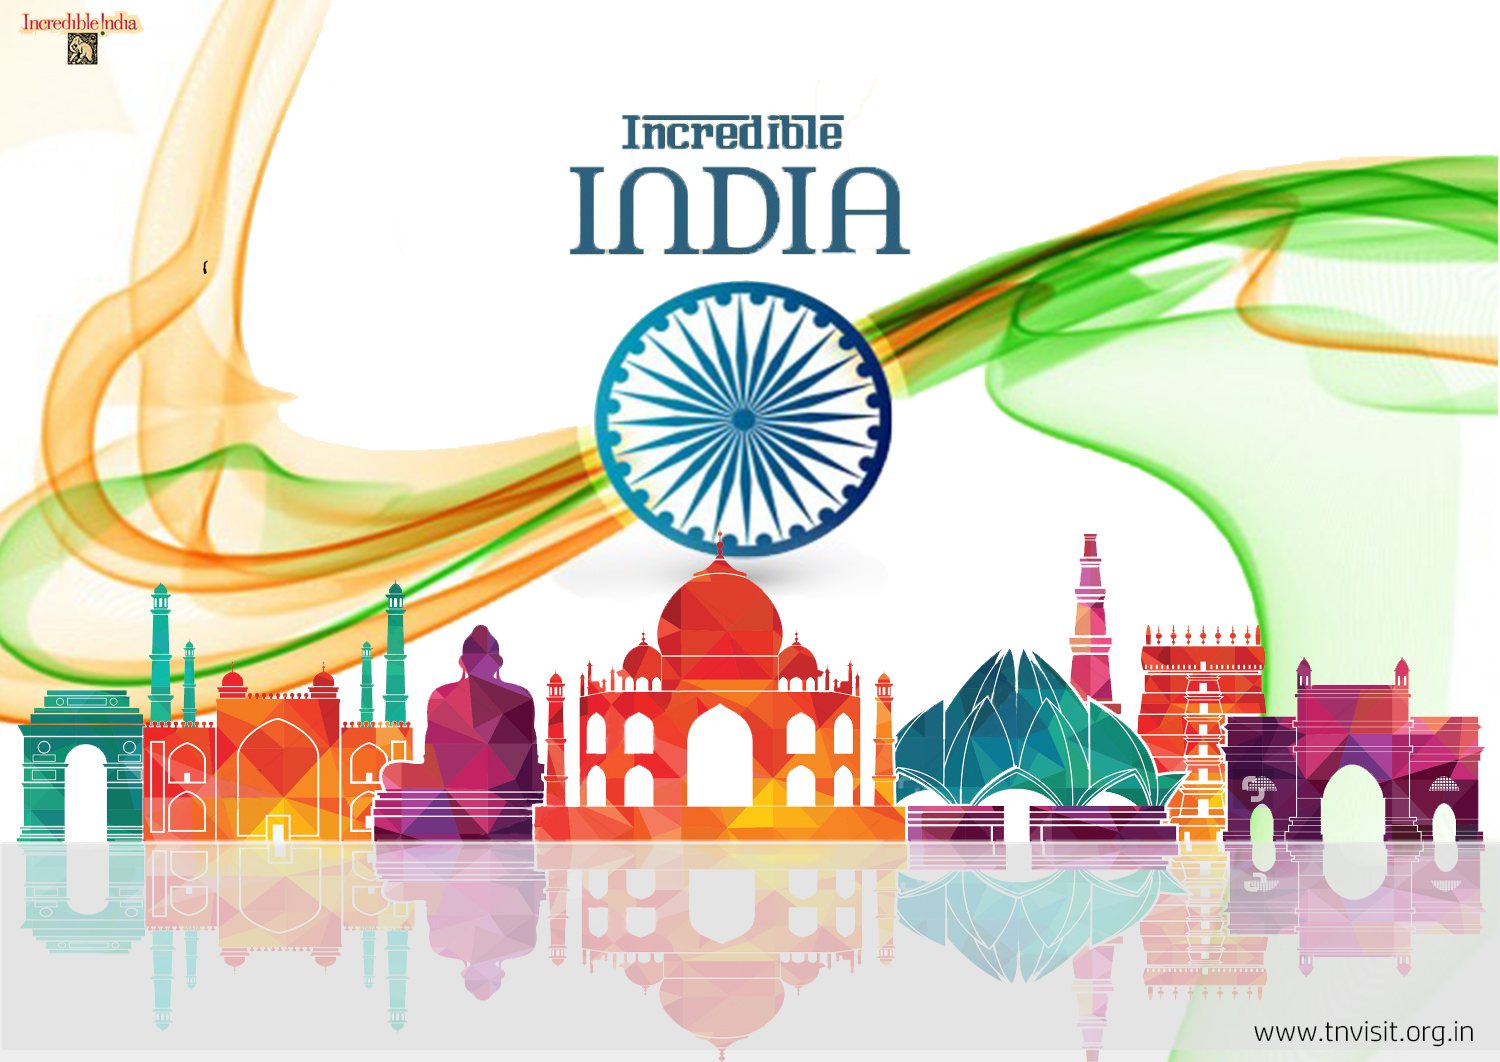 poster making on tourism in india